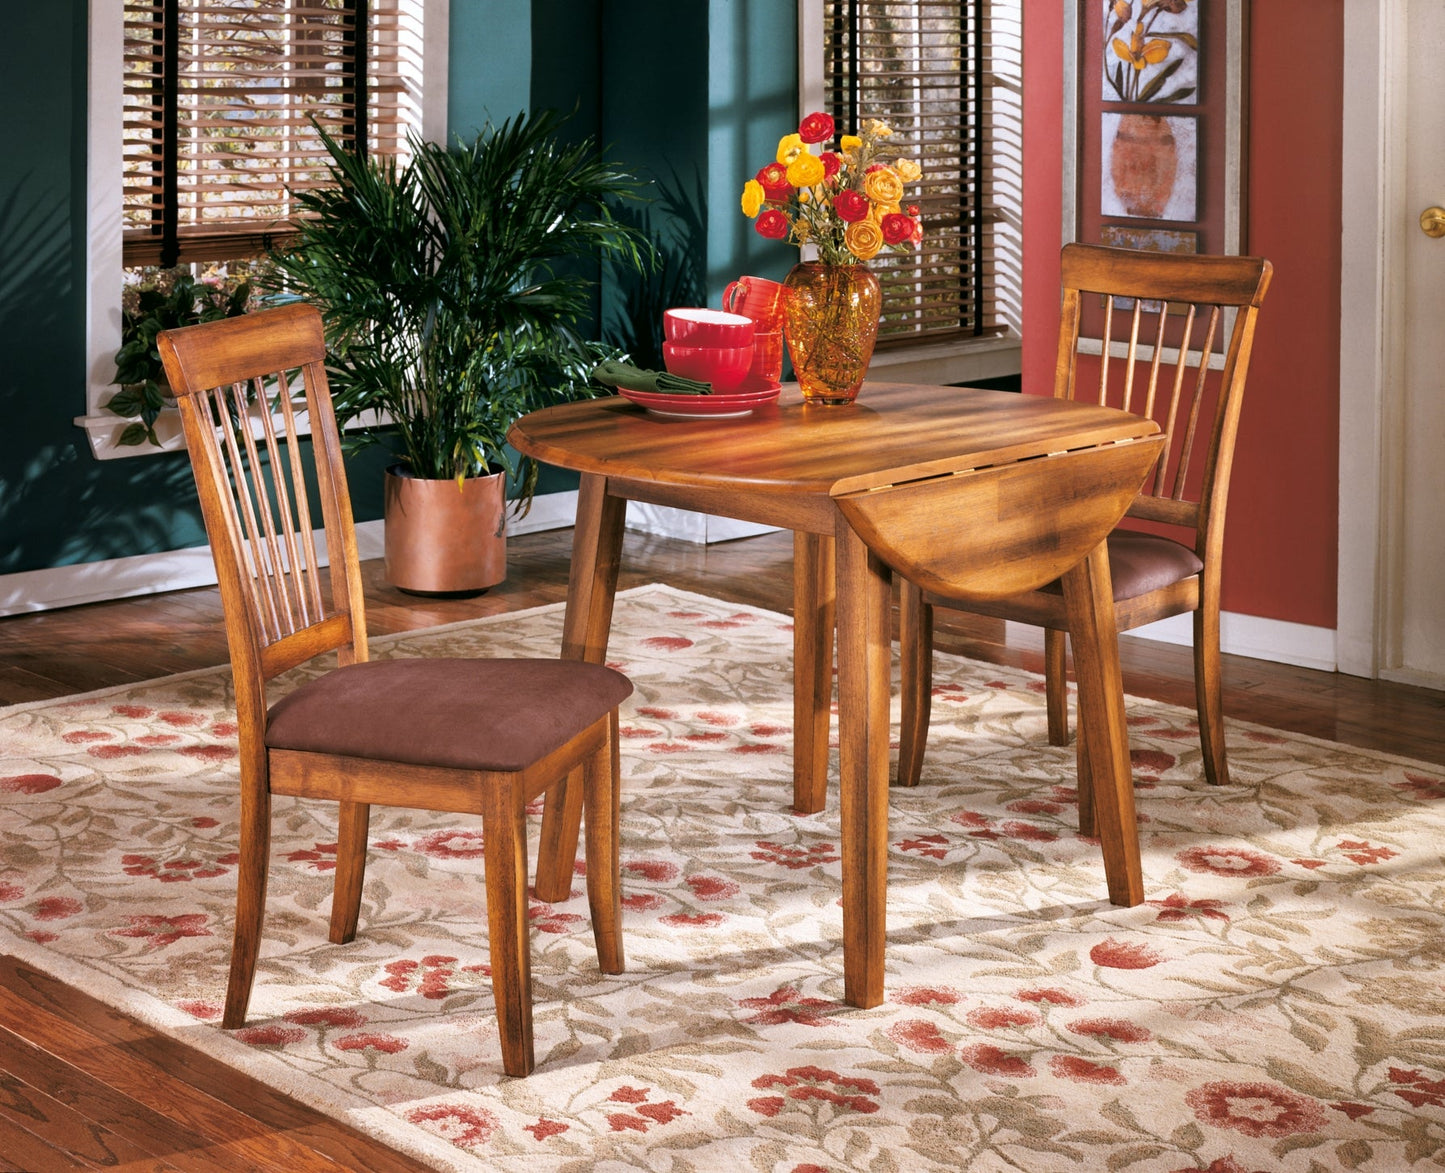 Berringer Dining Table and 2 Chairs Rent Wise Rent To Own Jacksonville, Florida